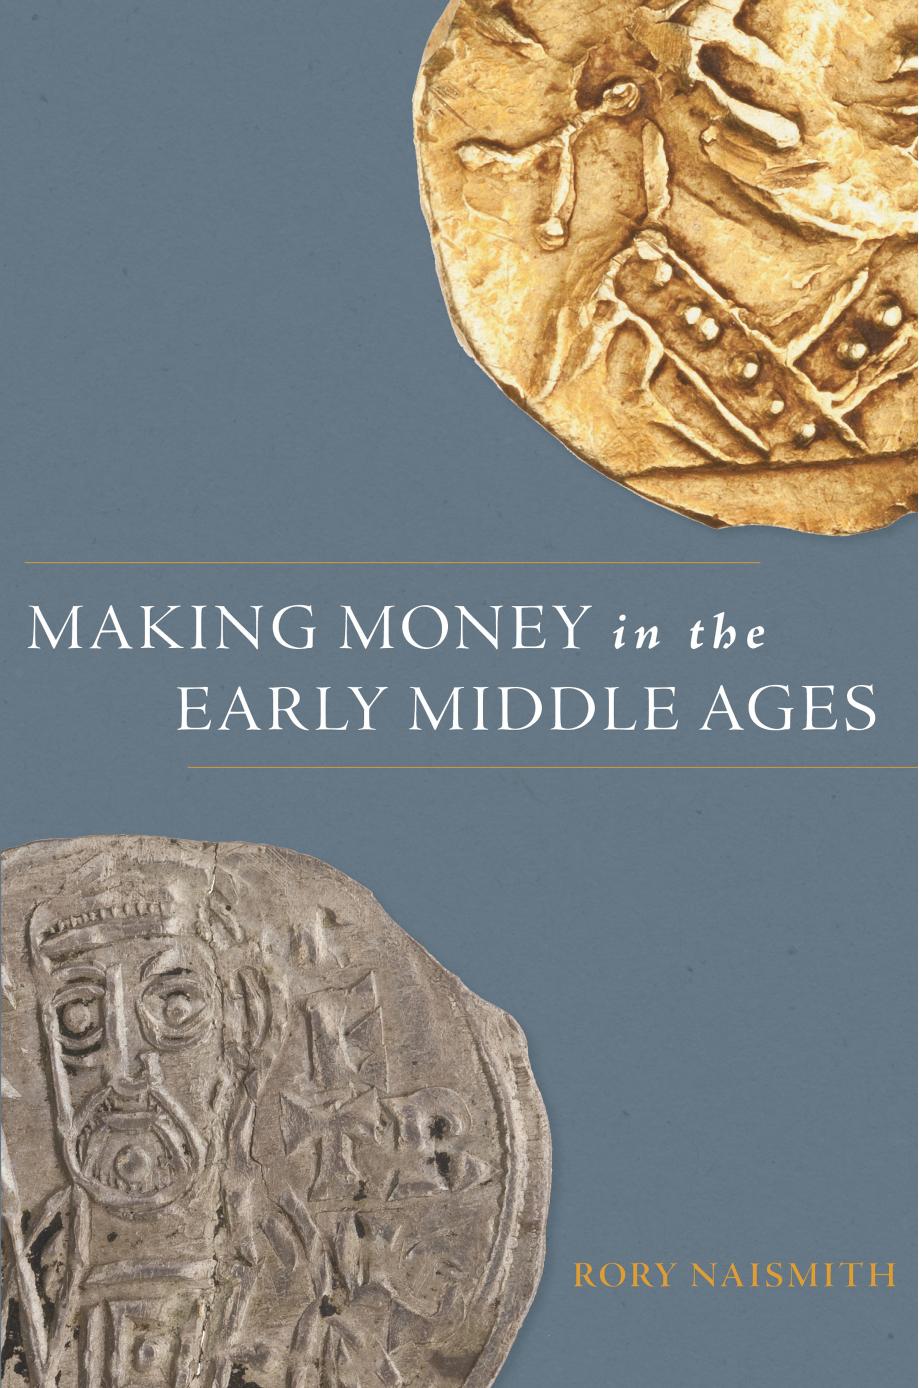 Making Money in the Early Middle Ages by Rory Naismith